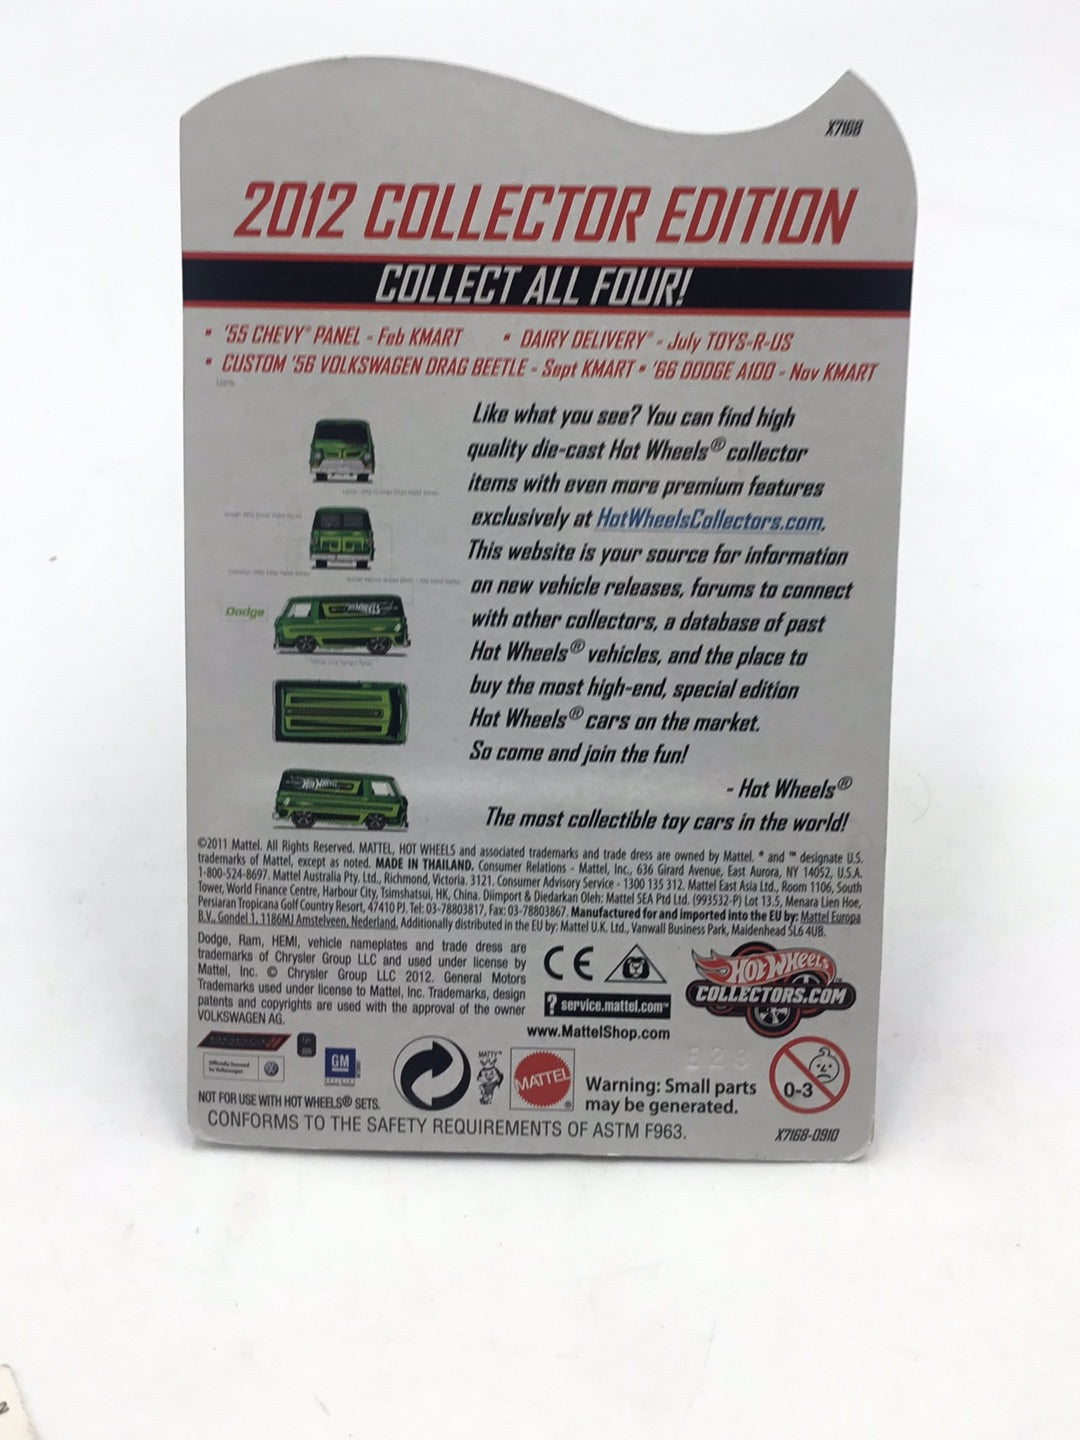 Hot wheels 2012 collectors edition 66 Dodge A100 Kmart mail in with protector